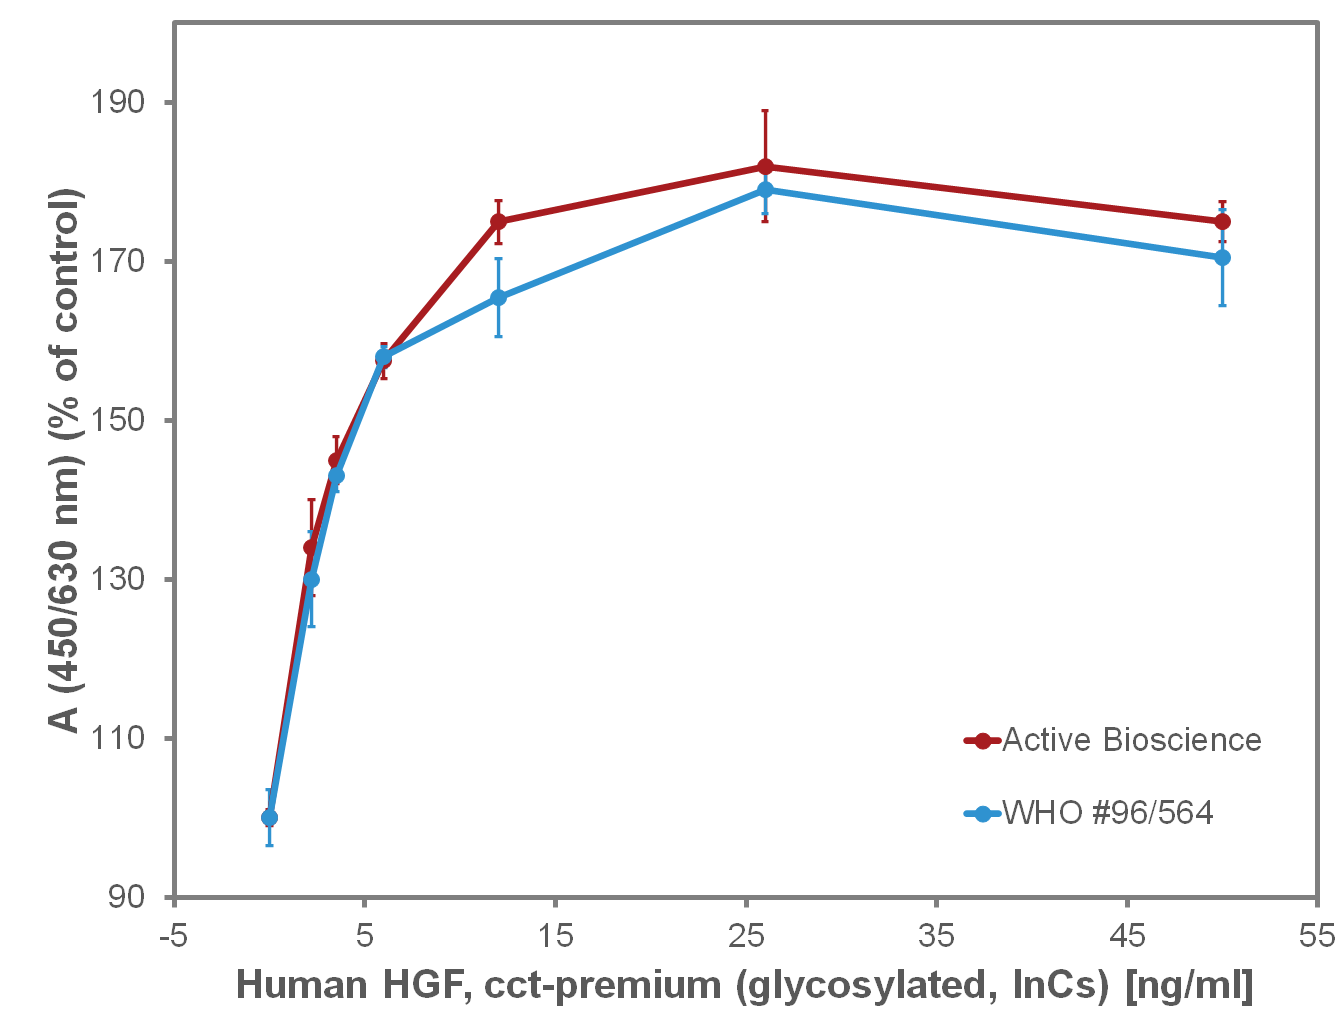 Fig 2: Measurement of scattering activity in MDCK cells by recombinant human HGF, cct-premium and the WHO standard 96/564. Values are the means (±SD) of triplicate determinations and expressed as percentage of control.